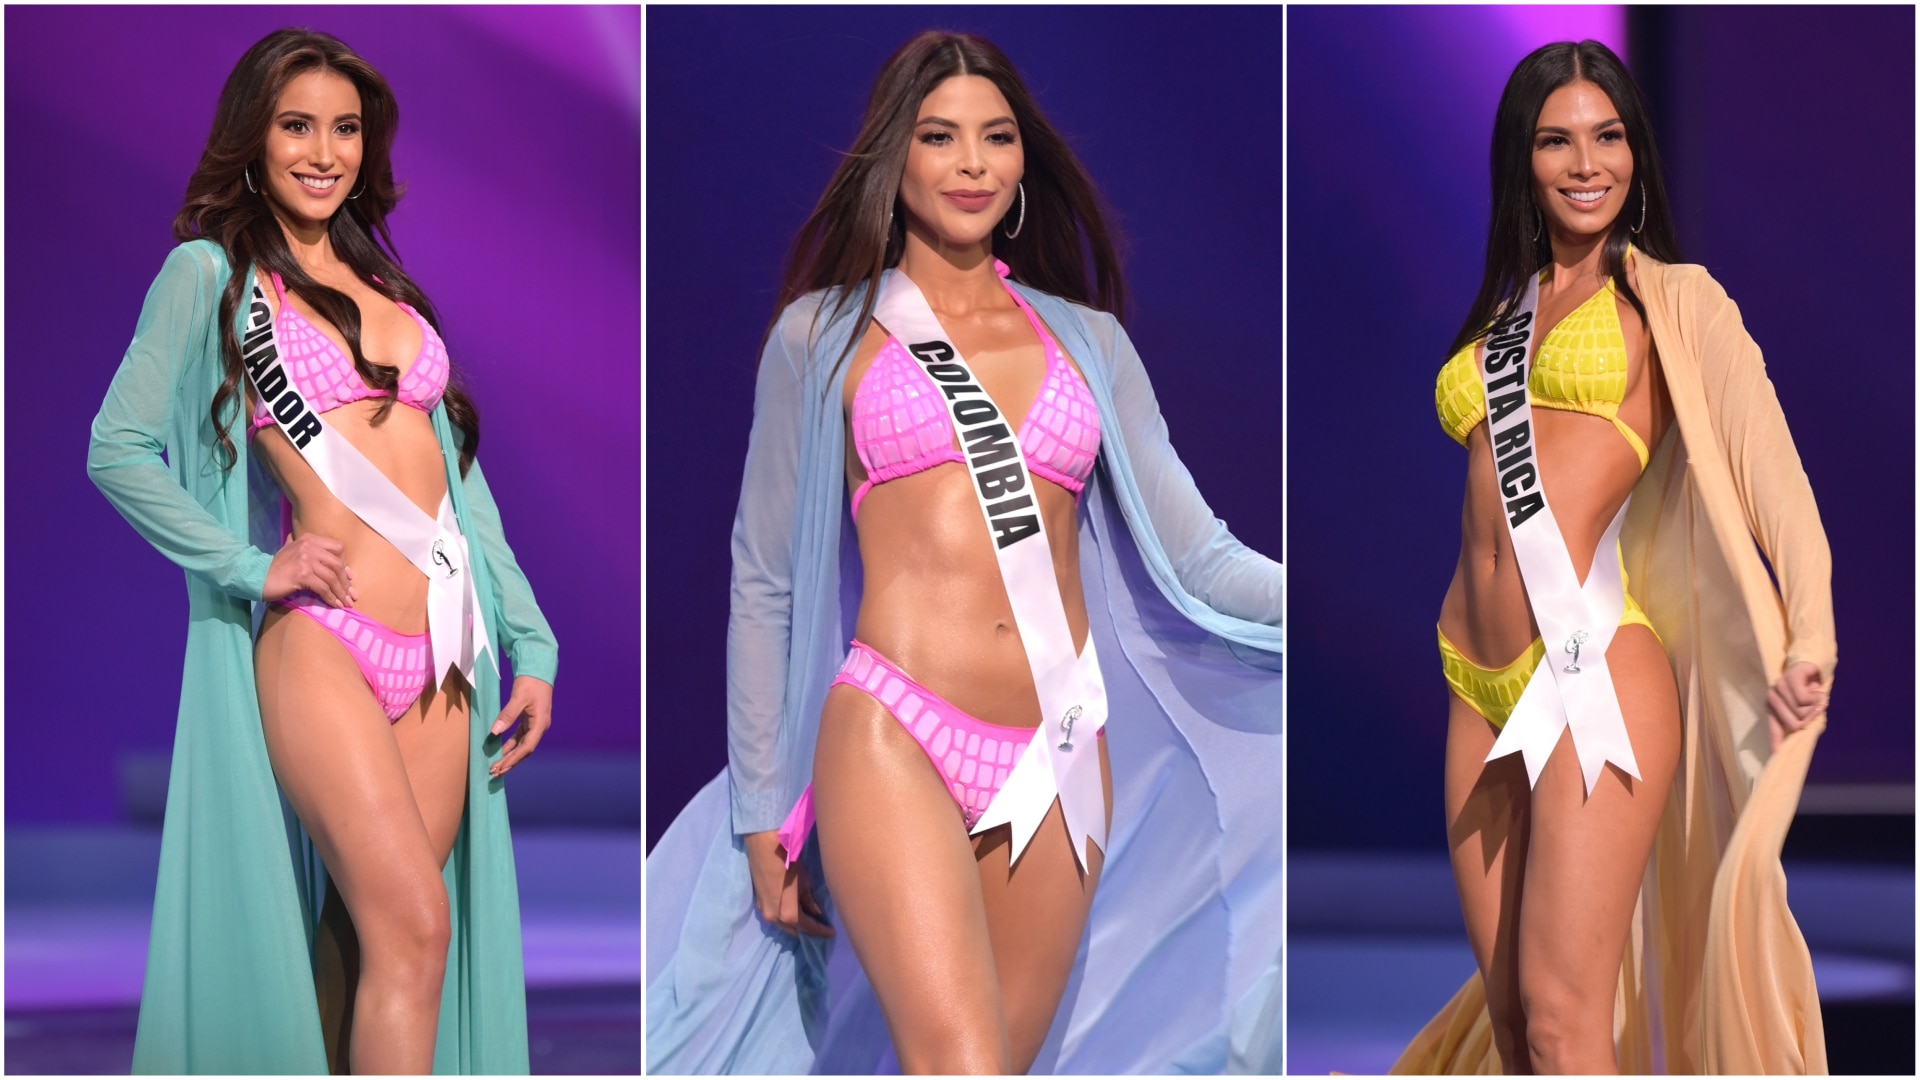 Watch Miss Universo Highlight Miss Universe Colombia, Miss Costa Rica